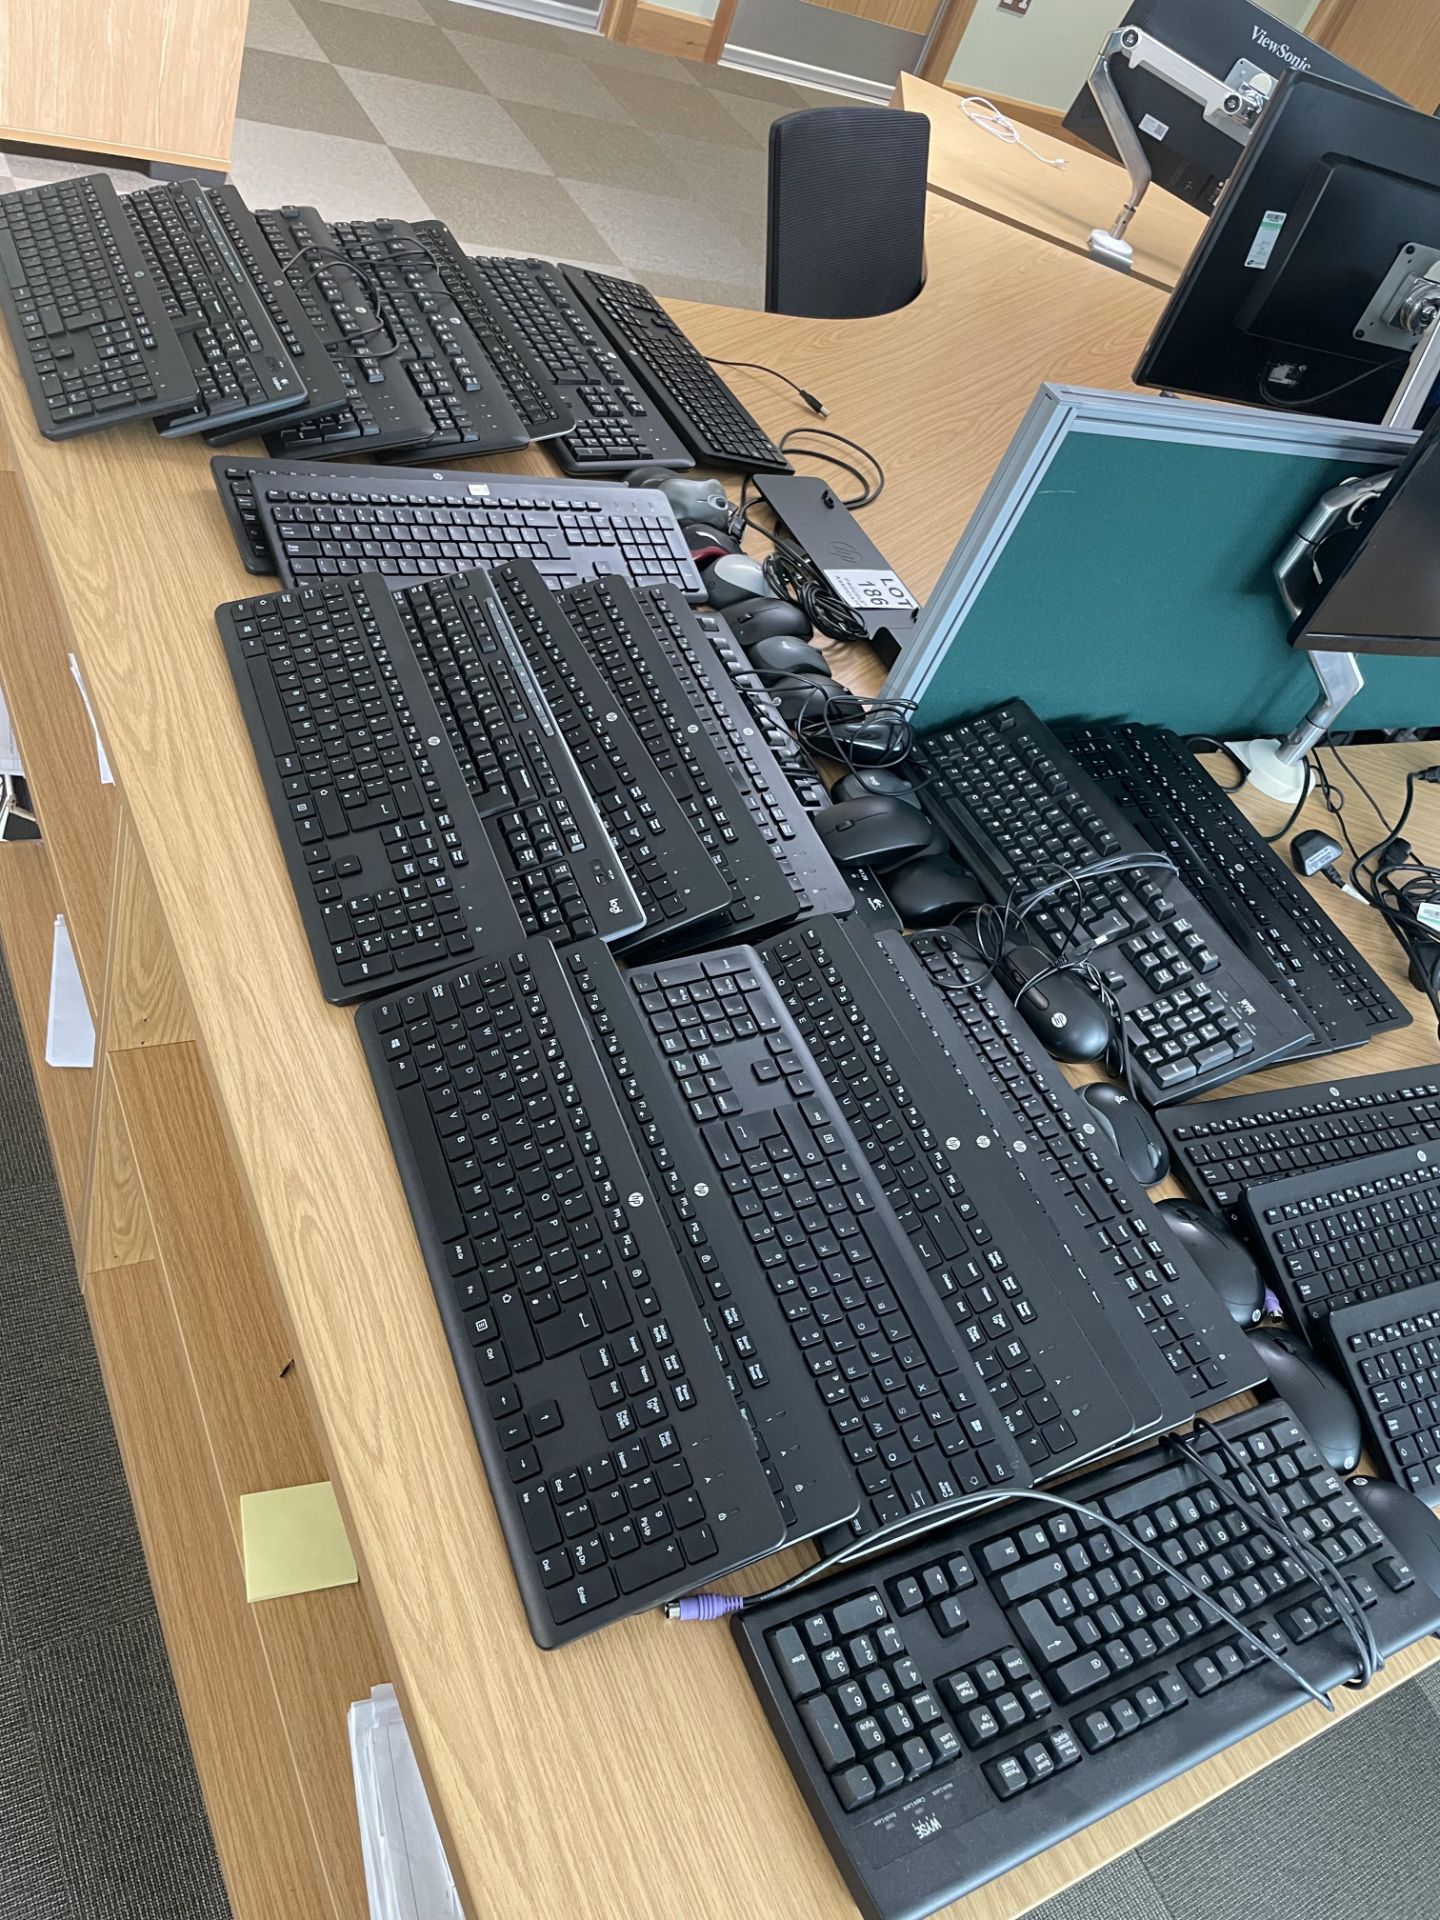 31 x Hp/Logi wireless keyboards with 16 wireless mice – (Please note only 9 USB connectors) and an